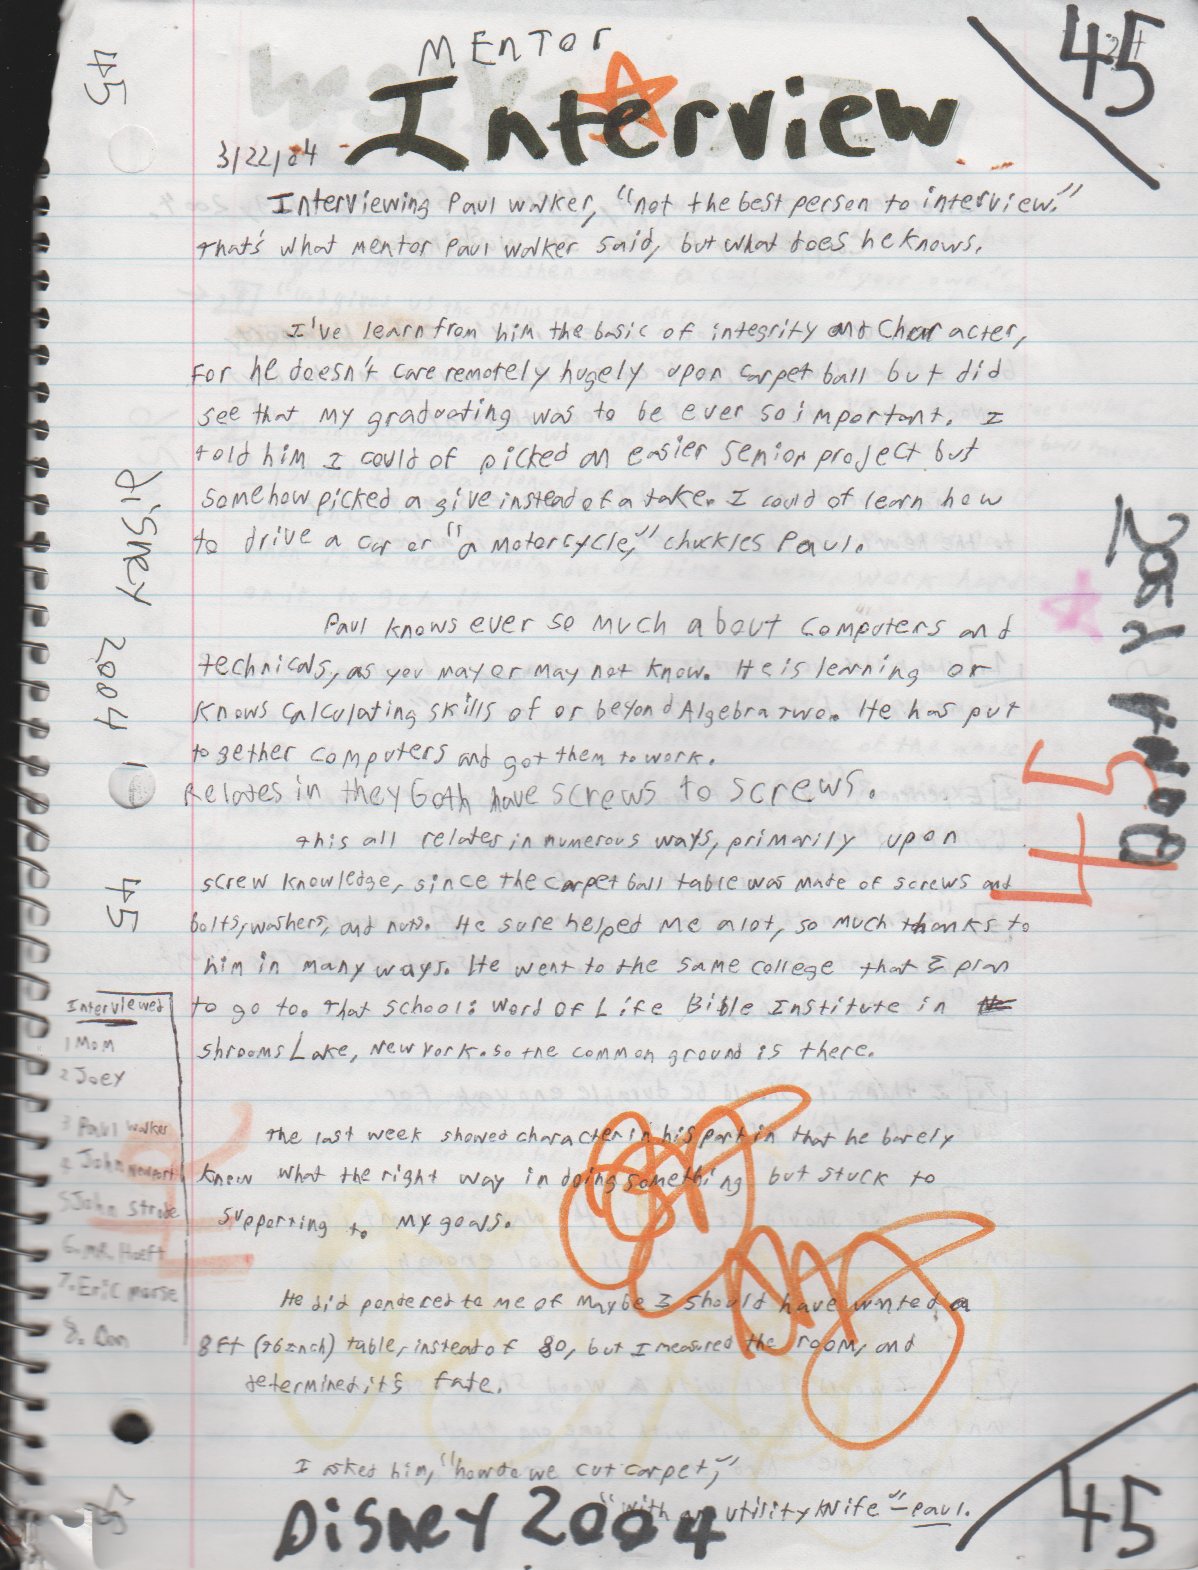 2004-01-29 - Thursday - Carpetball FGHS Senior Project Journal, Joey Arnold, Part 02, 96pages numbered, Notebook-42.png